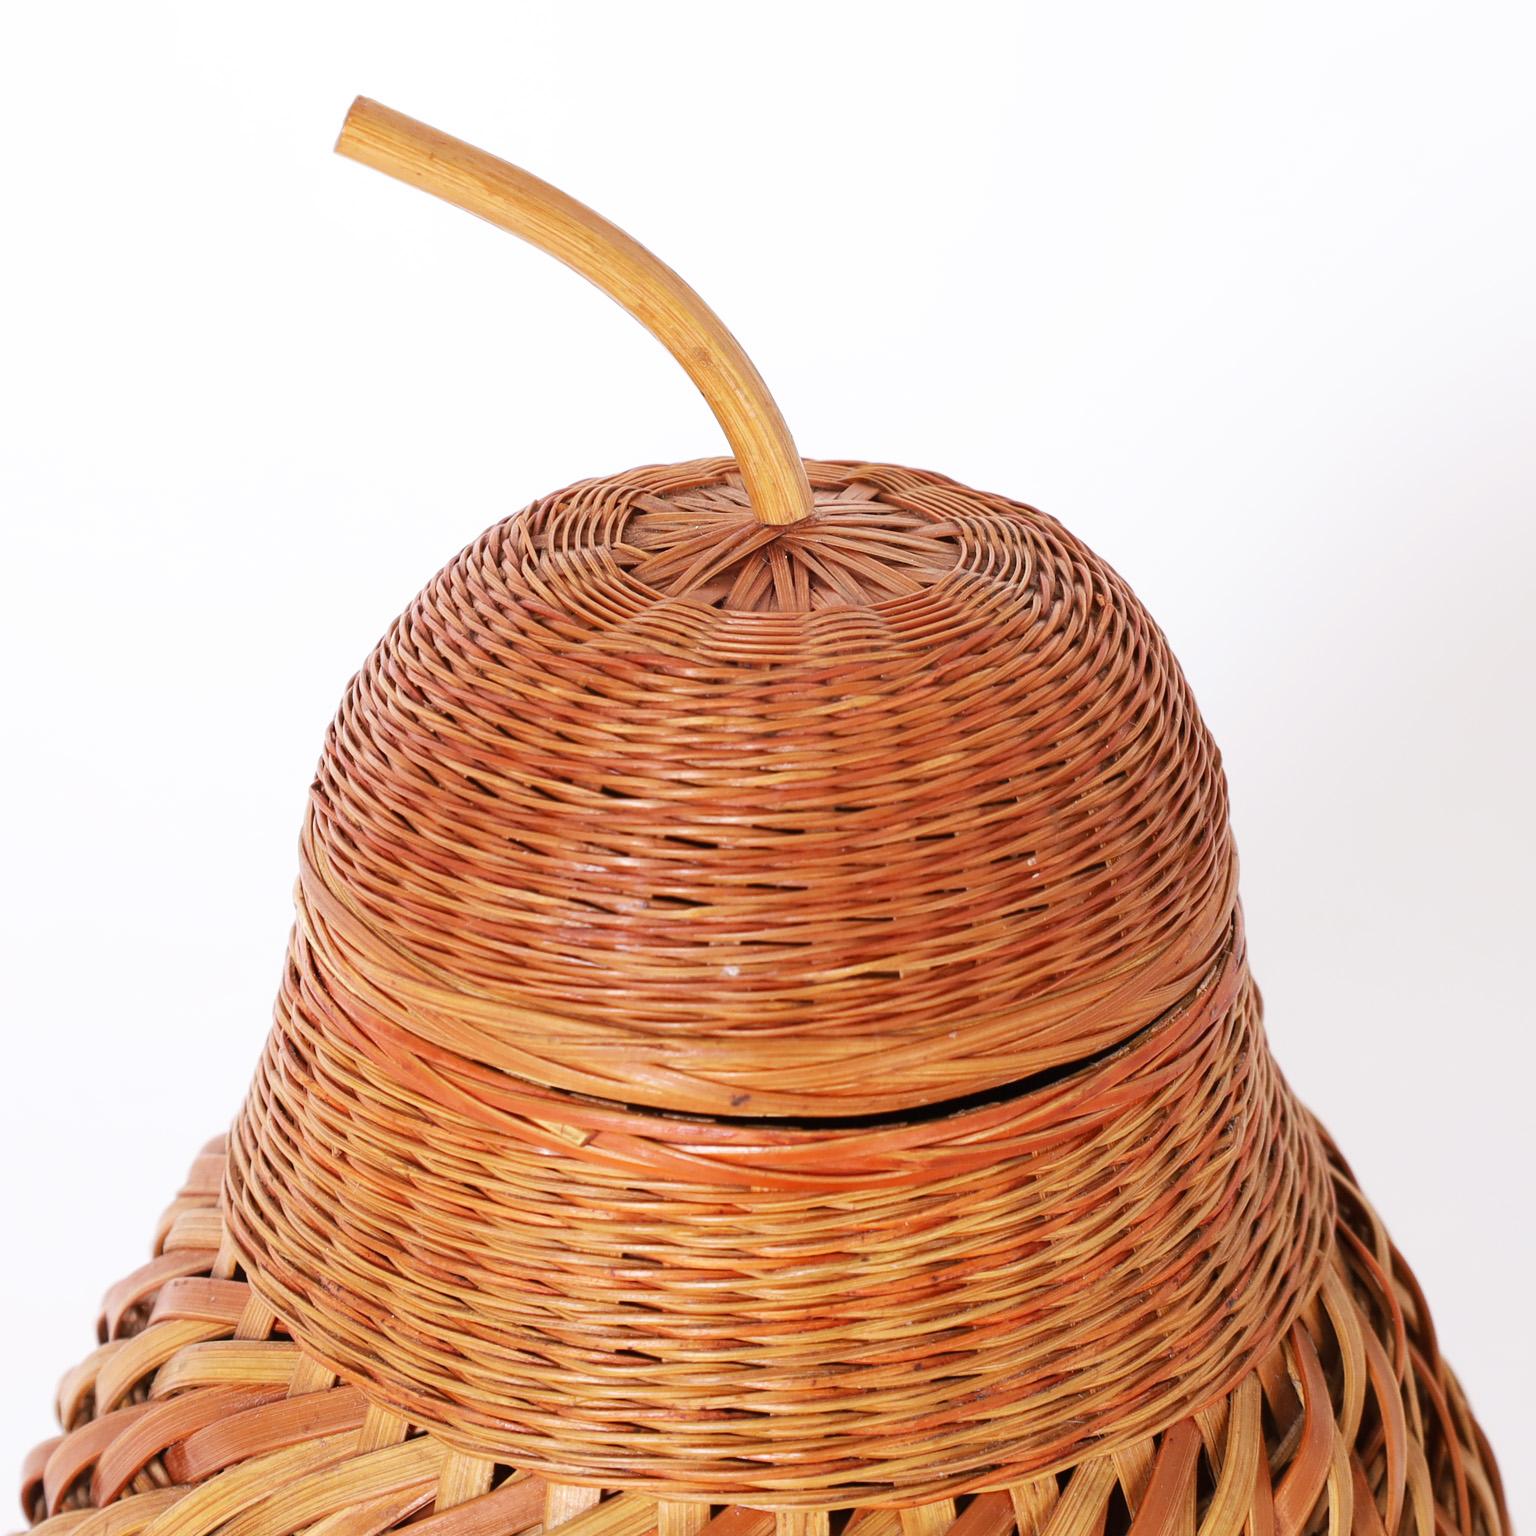 Shapely pear form lidded container ambitiously crafted with woven reed in several patterns over a ceramic vessel.